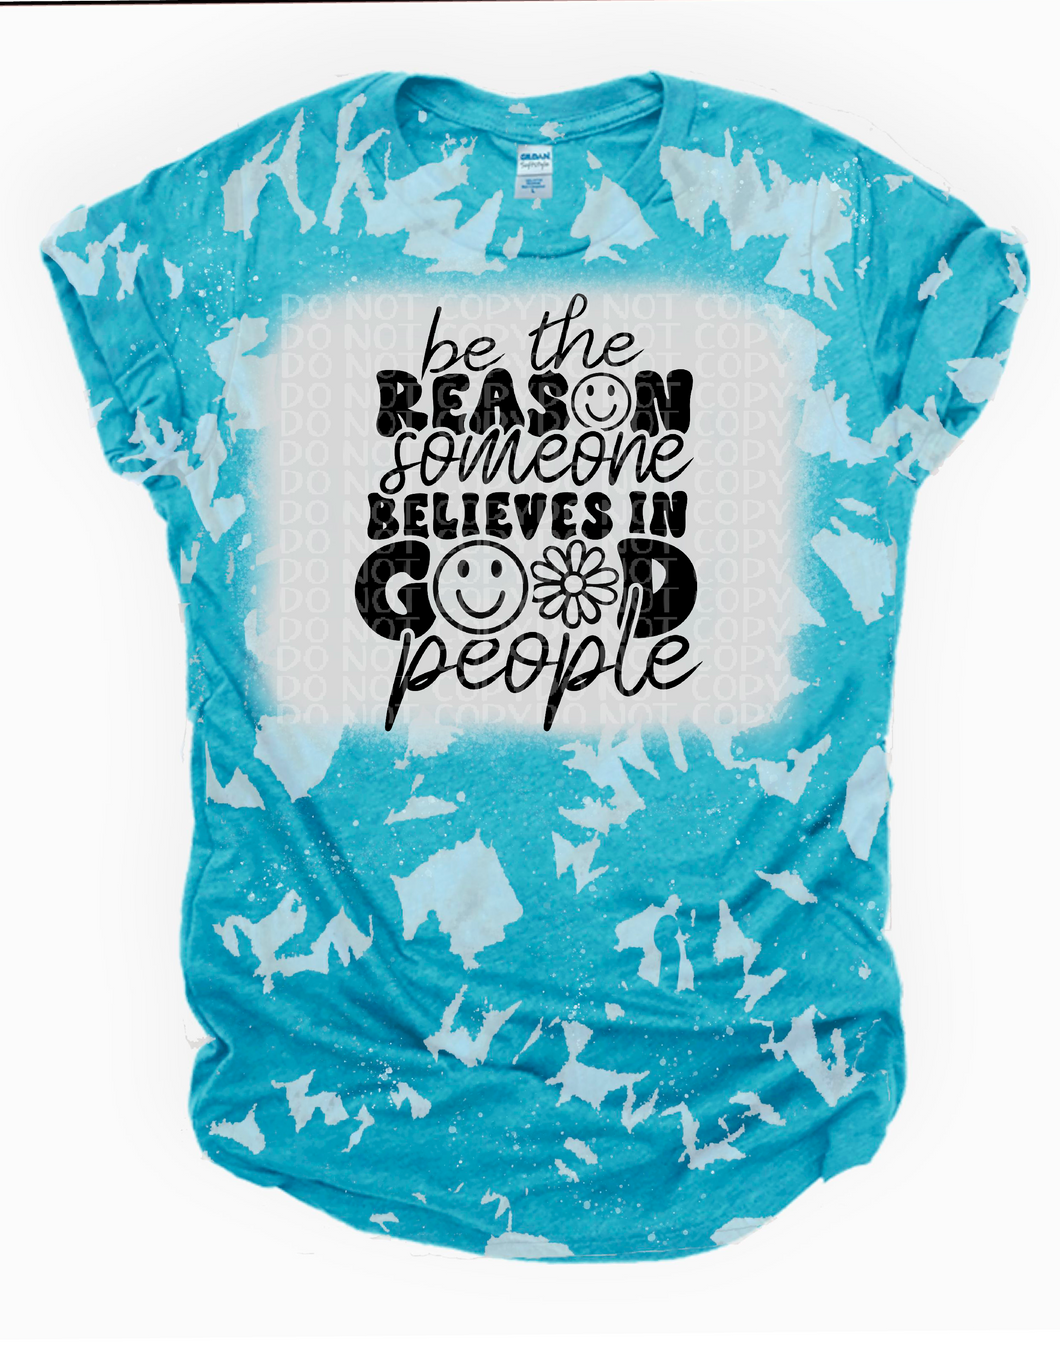 be the reason someone believes in good people- no Bleach or Bleached Tee